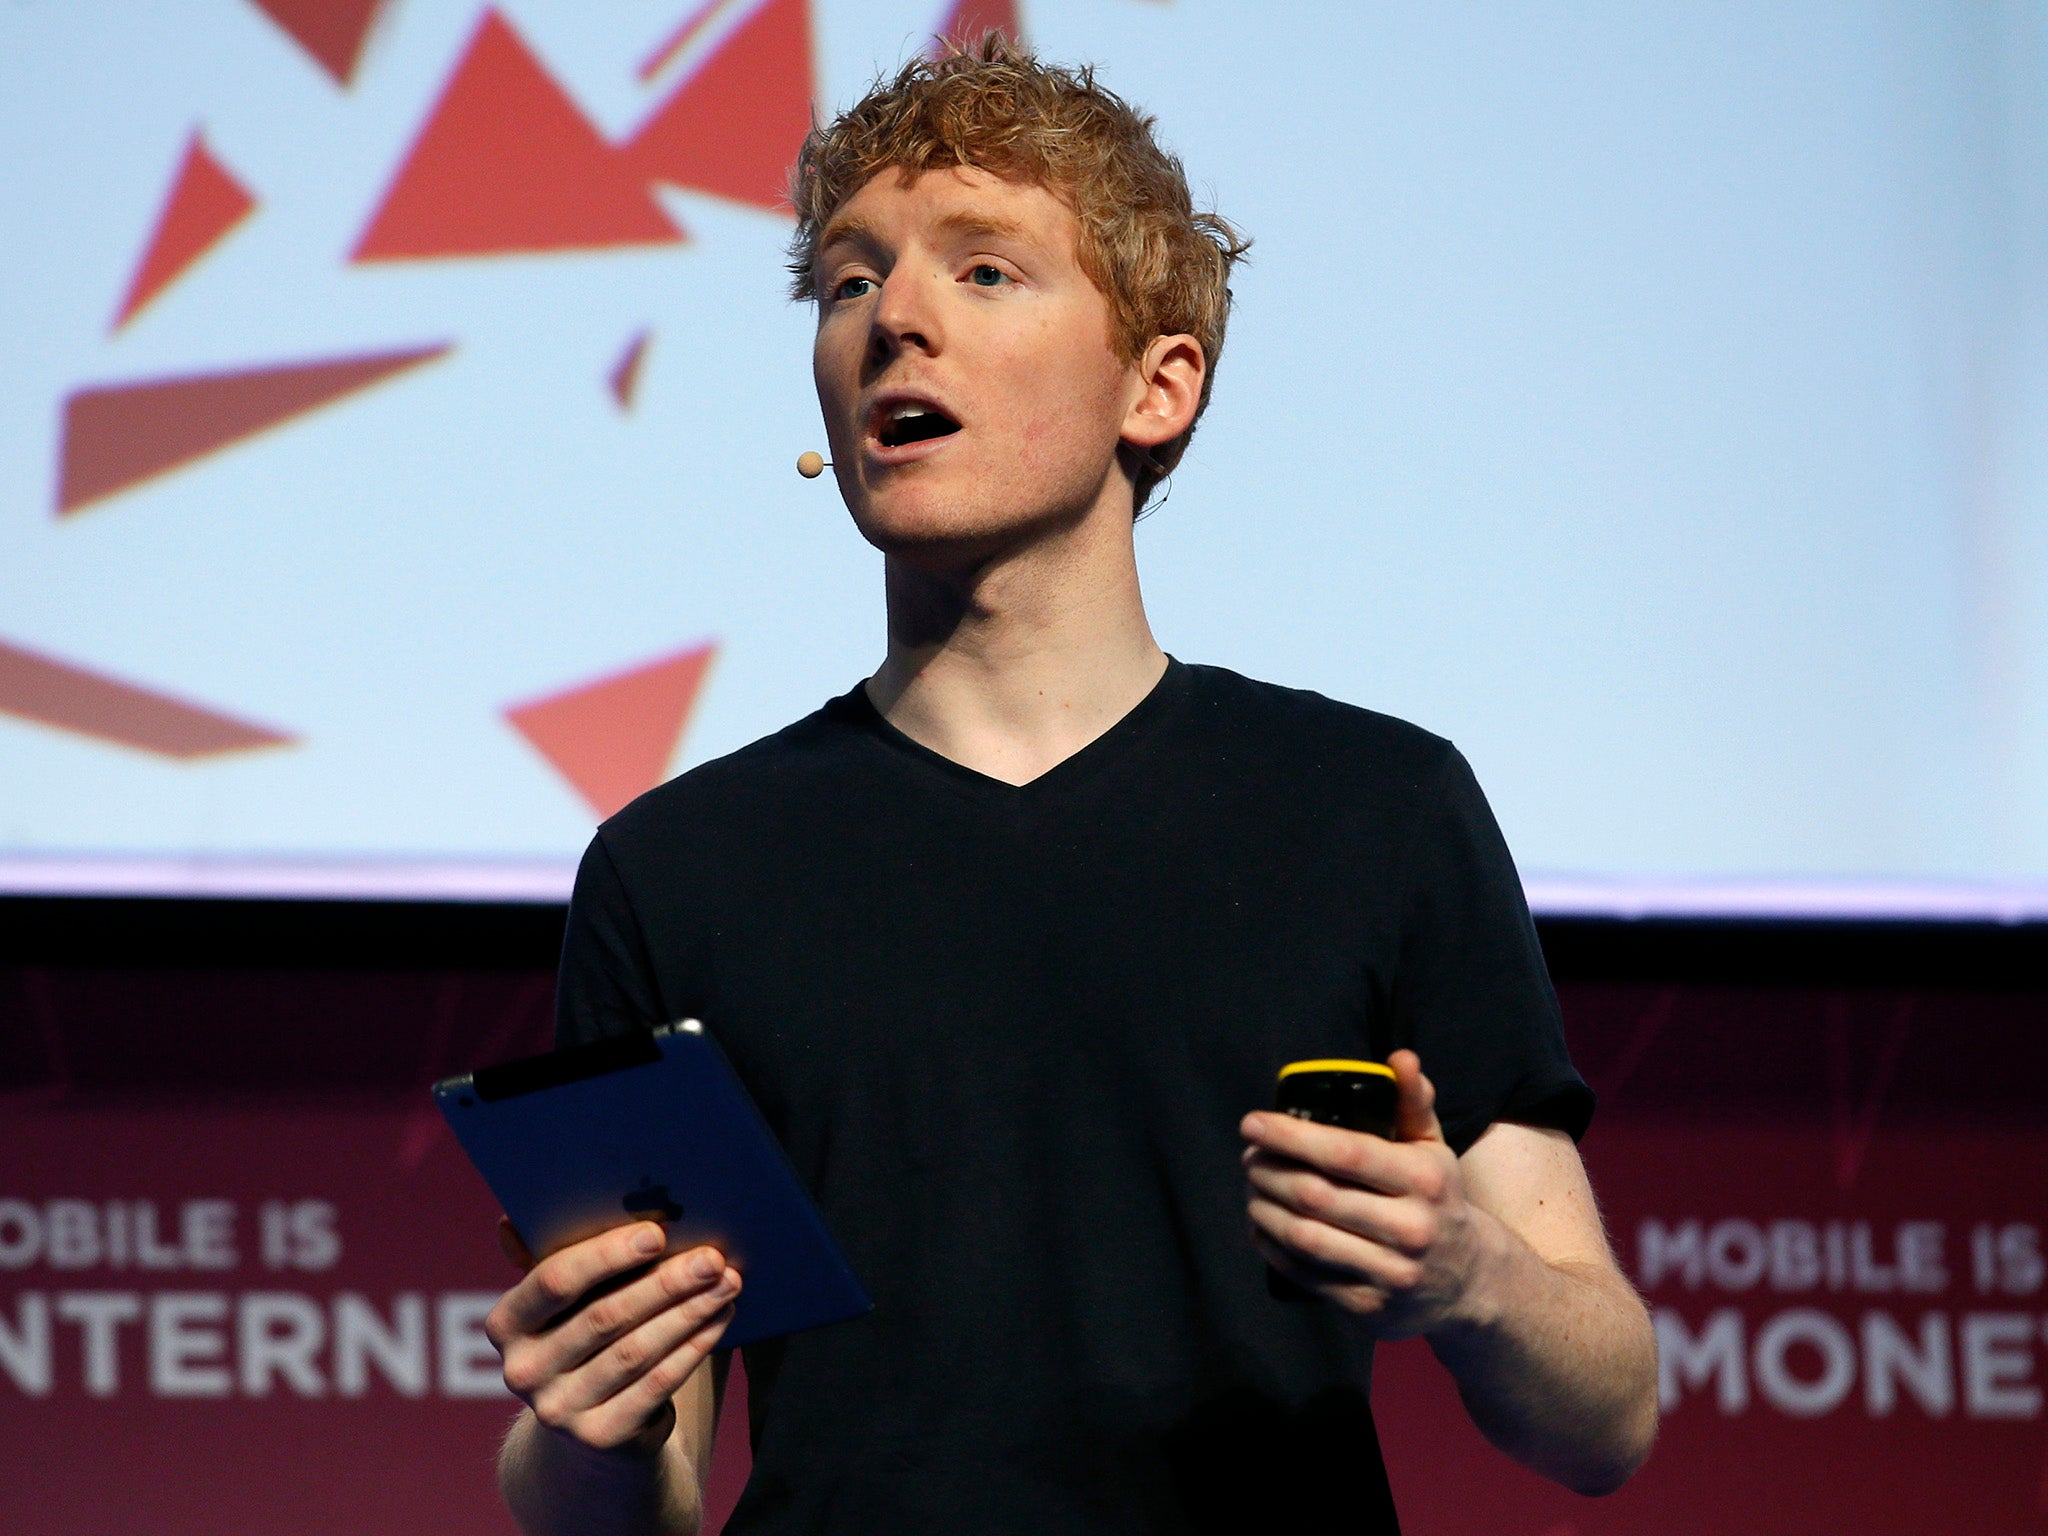 Patrick Collison, co-founder and CEO at Stripe.